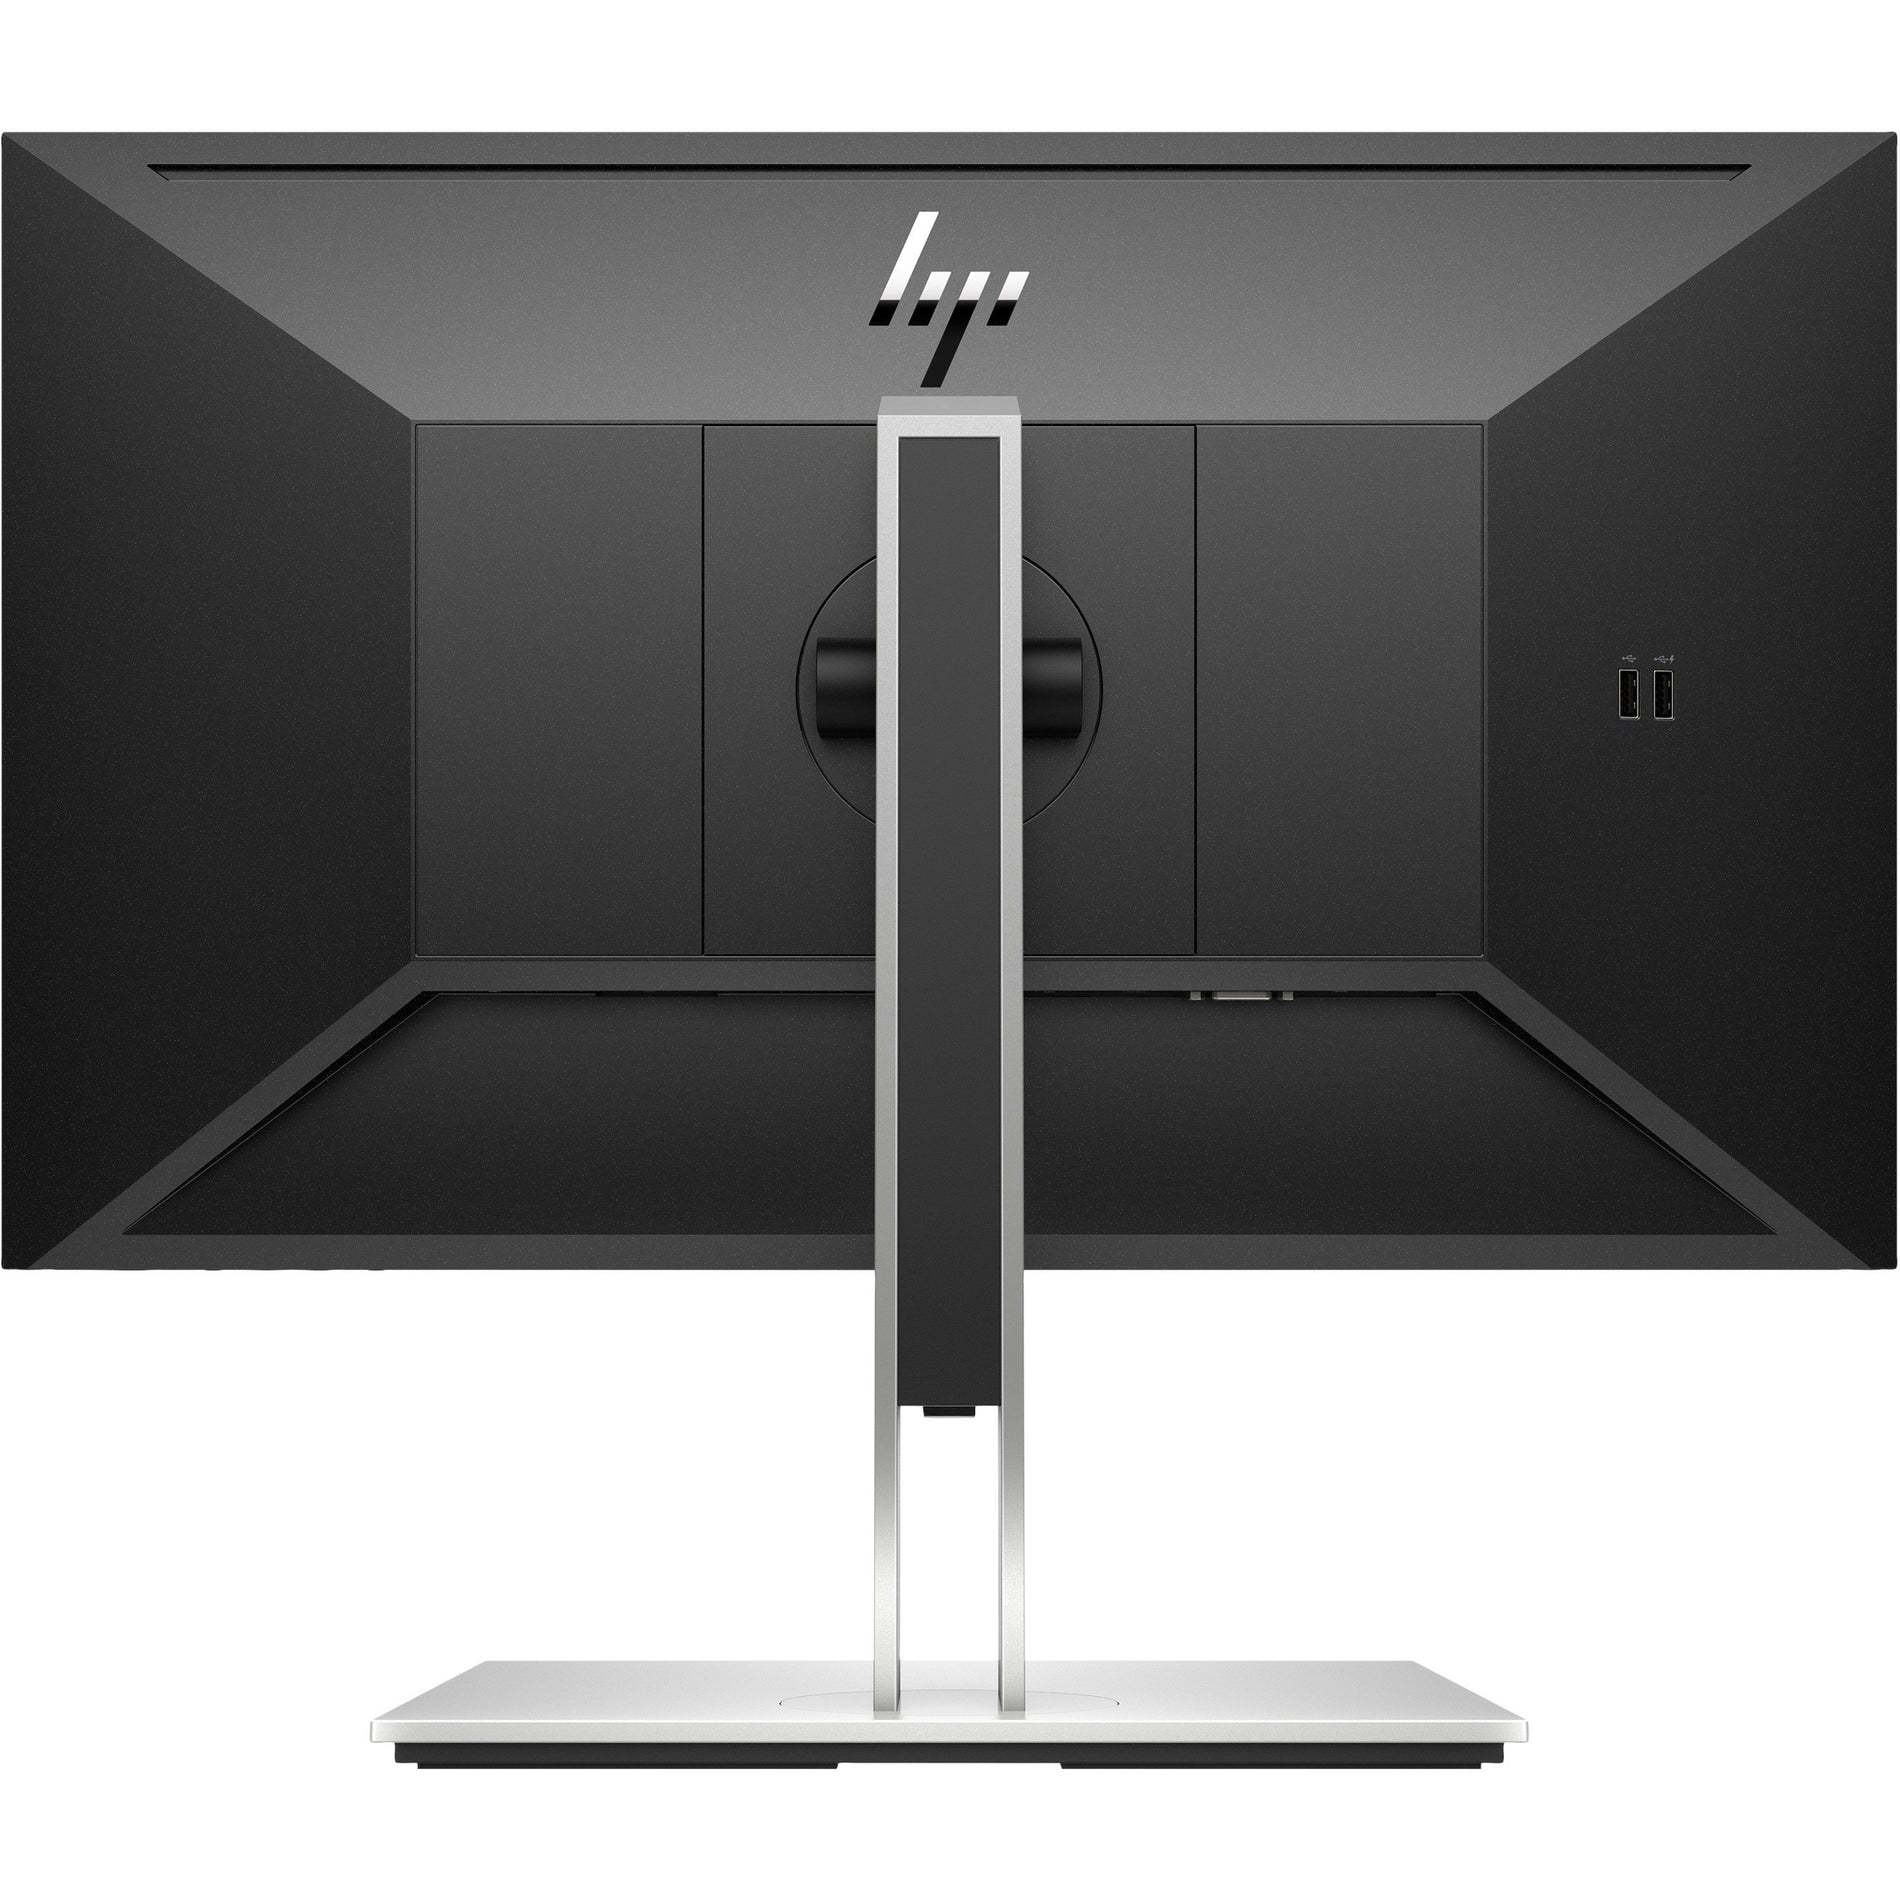 HP E23 G4 23" Full HD LCD Monitor, 250 Nit Brightness, 1920 x 1080 Resolution, 1,000:1 Contrast Ratio [Discontinued]